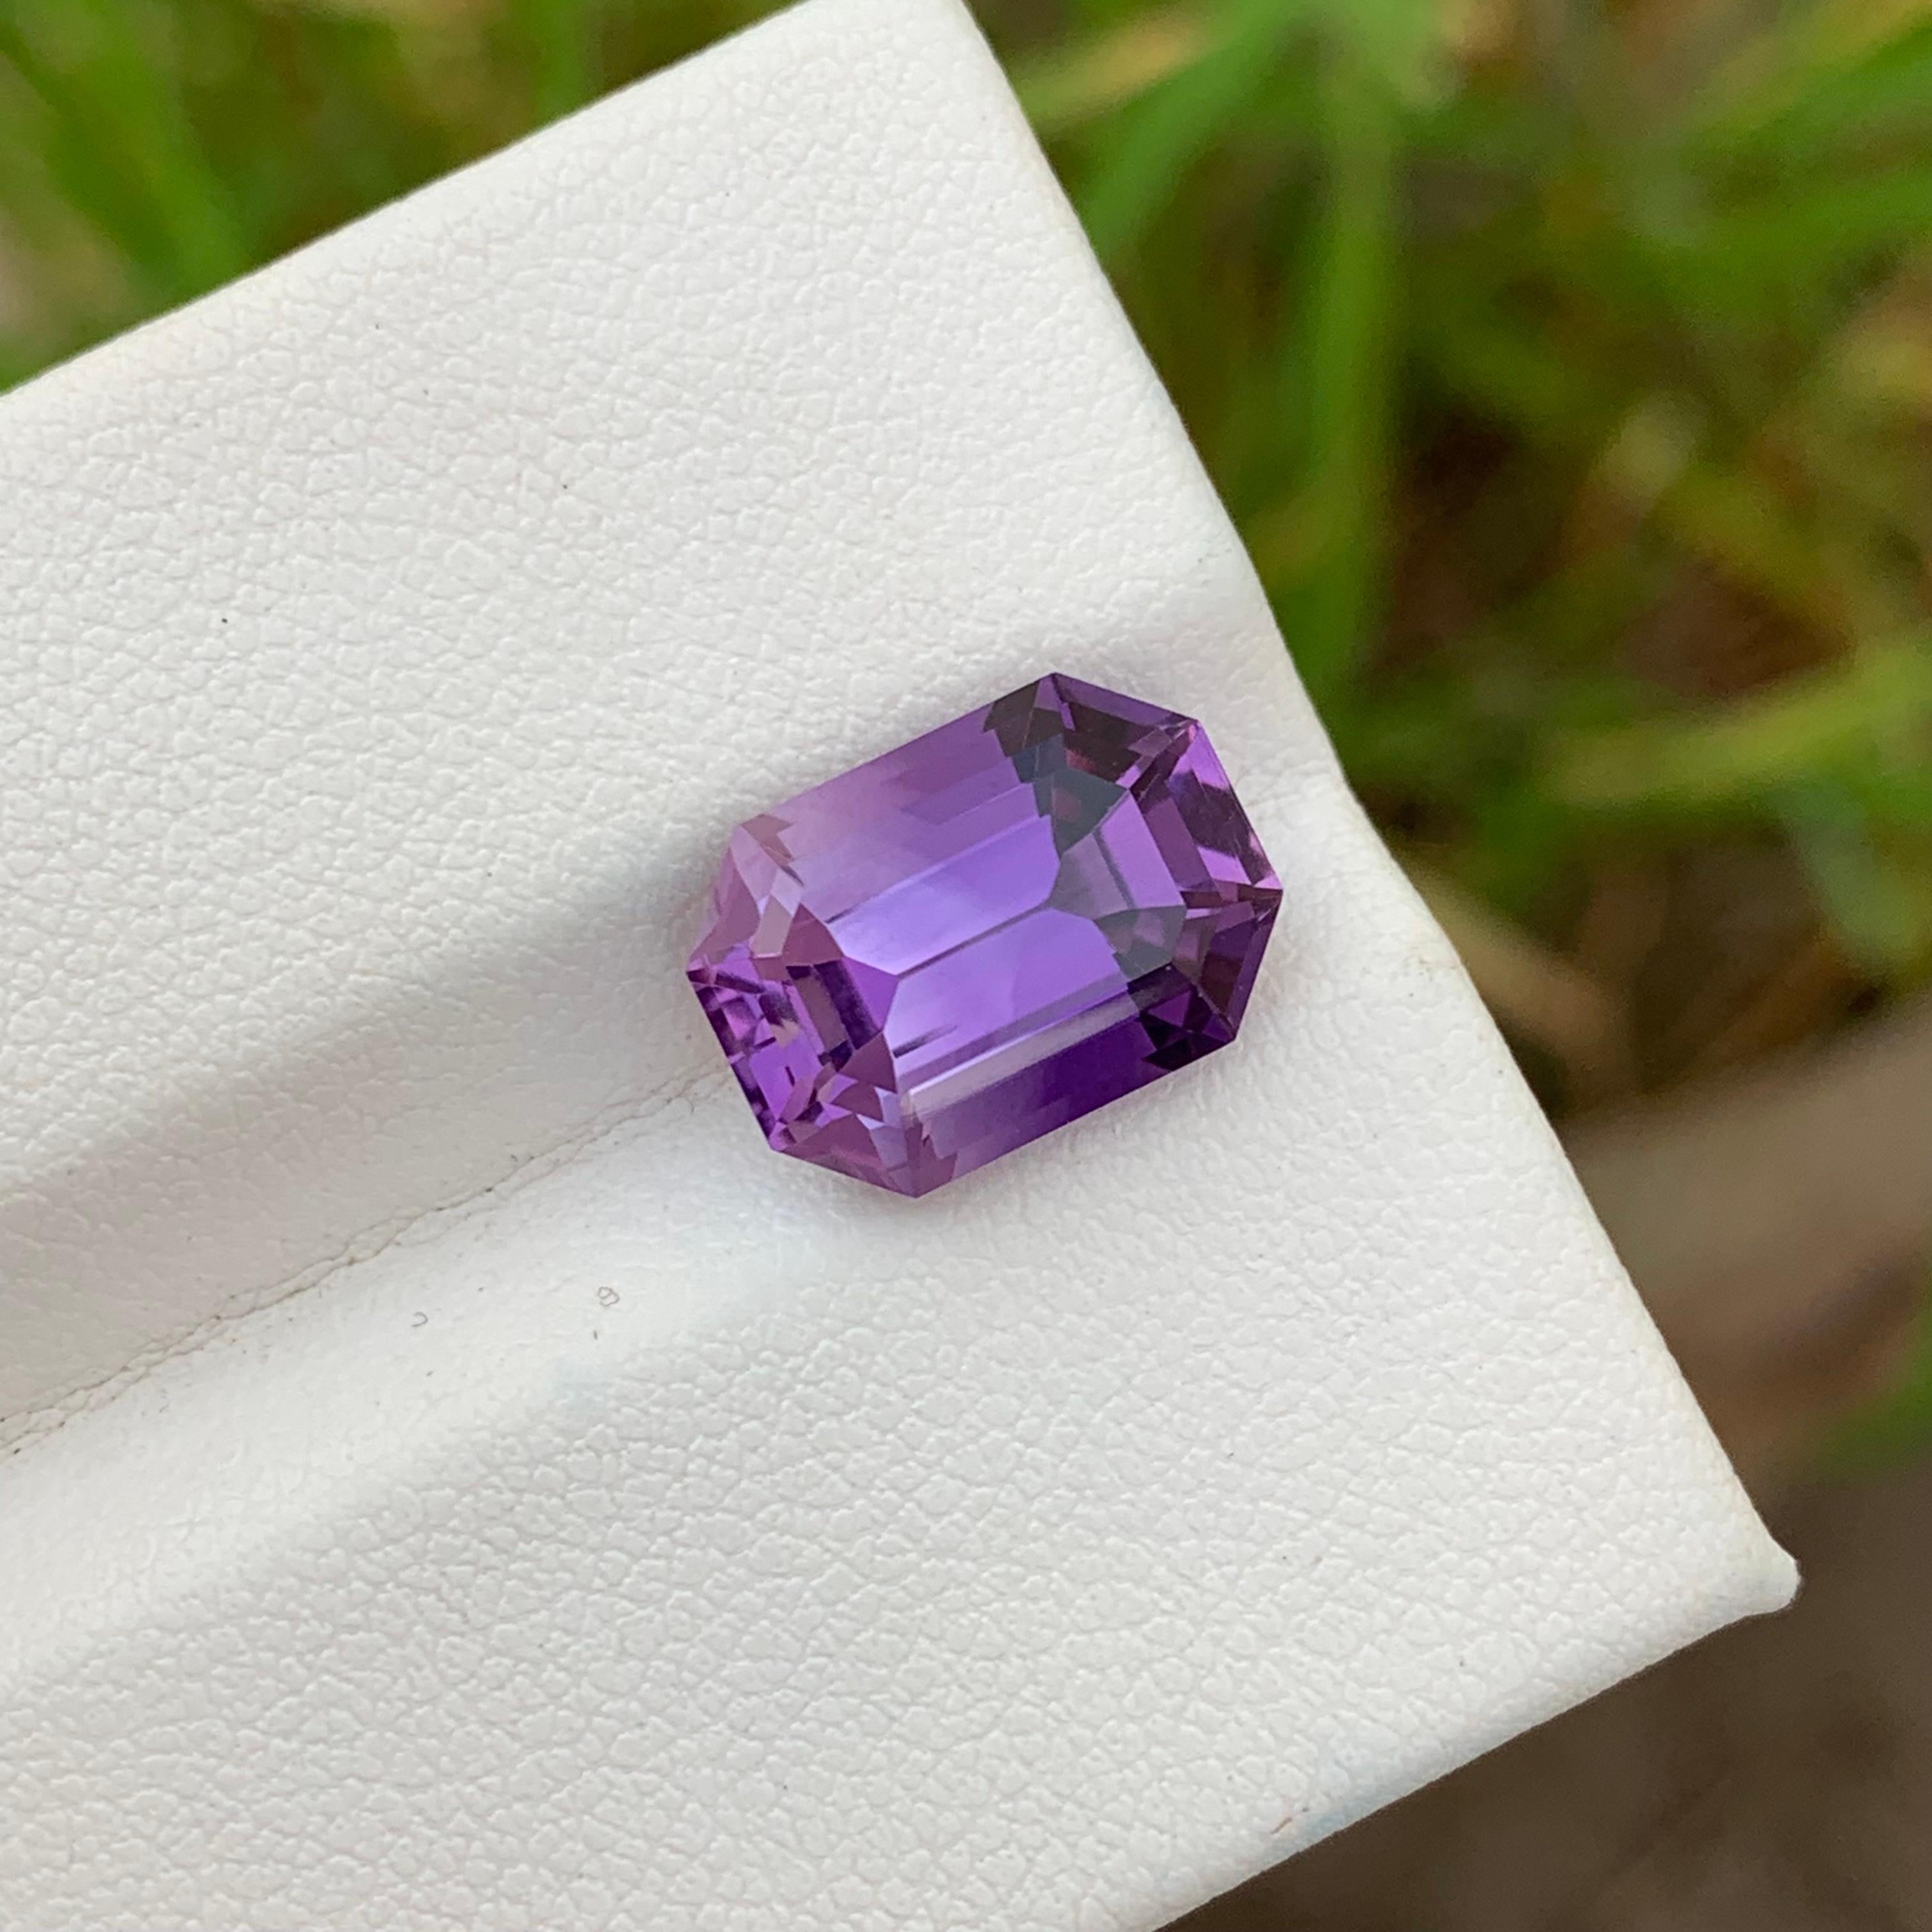 Women's or Men's 5.60 Carats Stunning Loose Purple Amethyst Gem From Brazil Mine February Stone For Sale